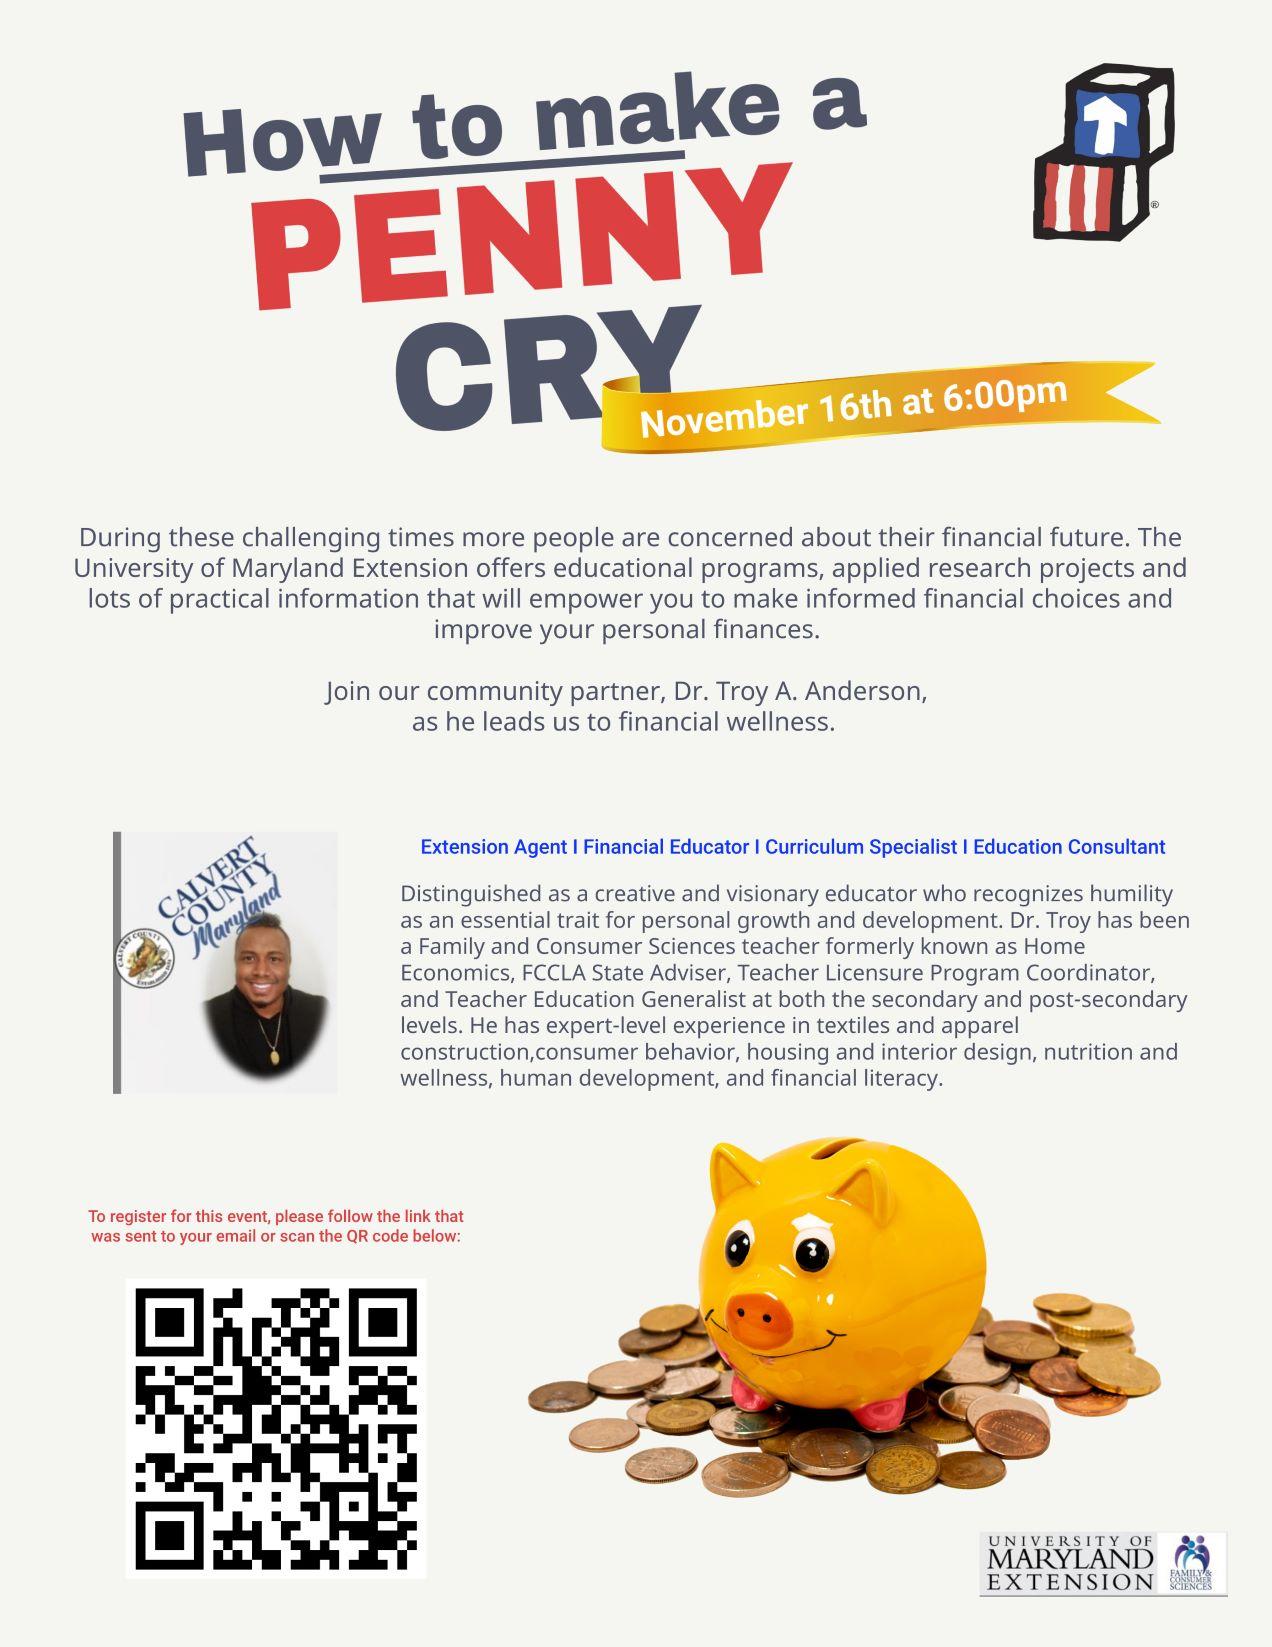 How to make a penny cry, November 16th at 6:00pm